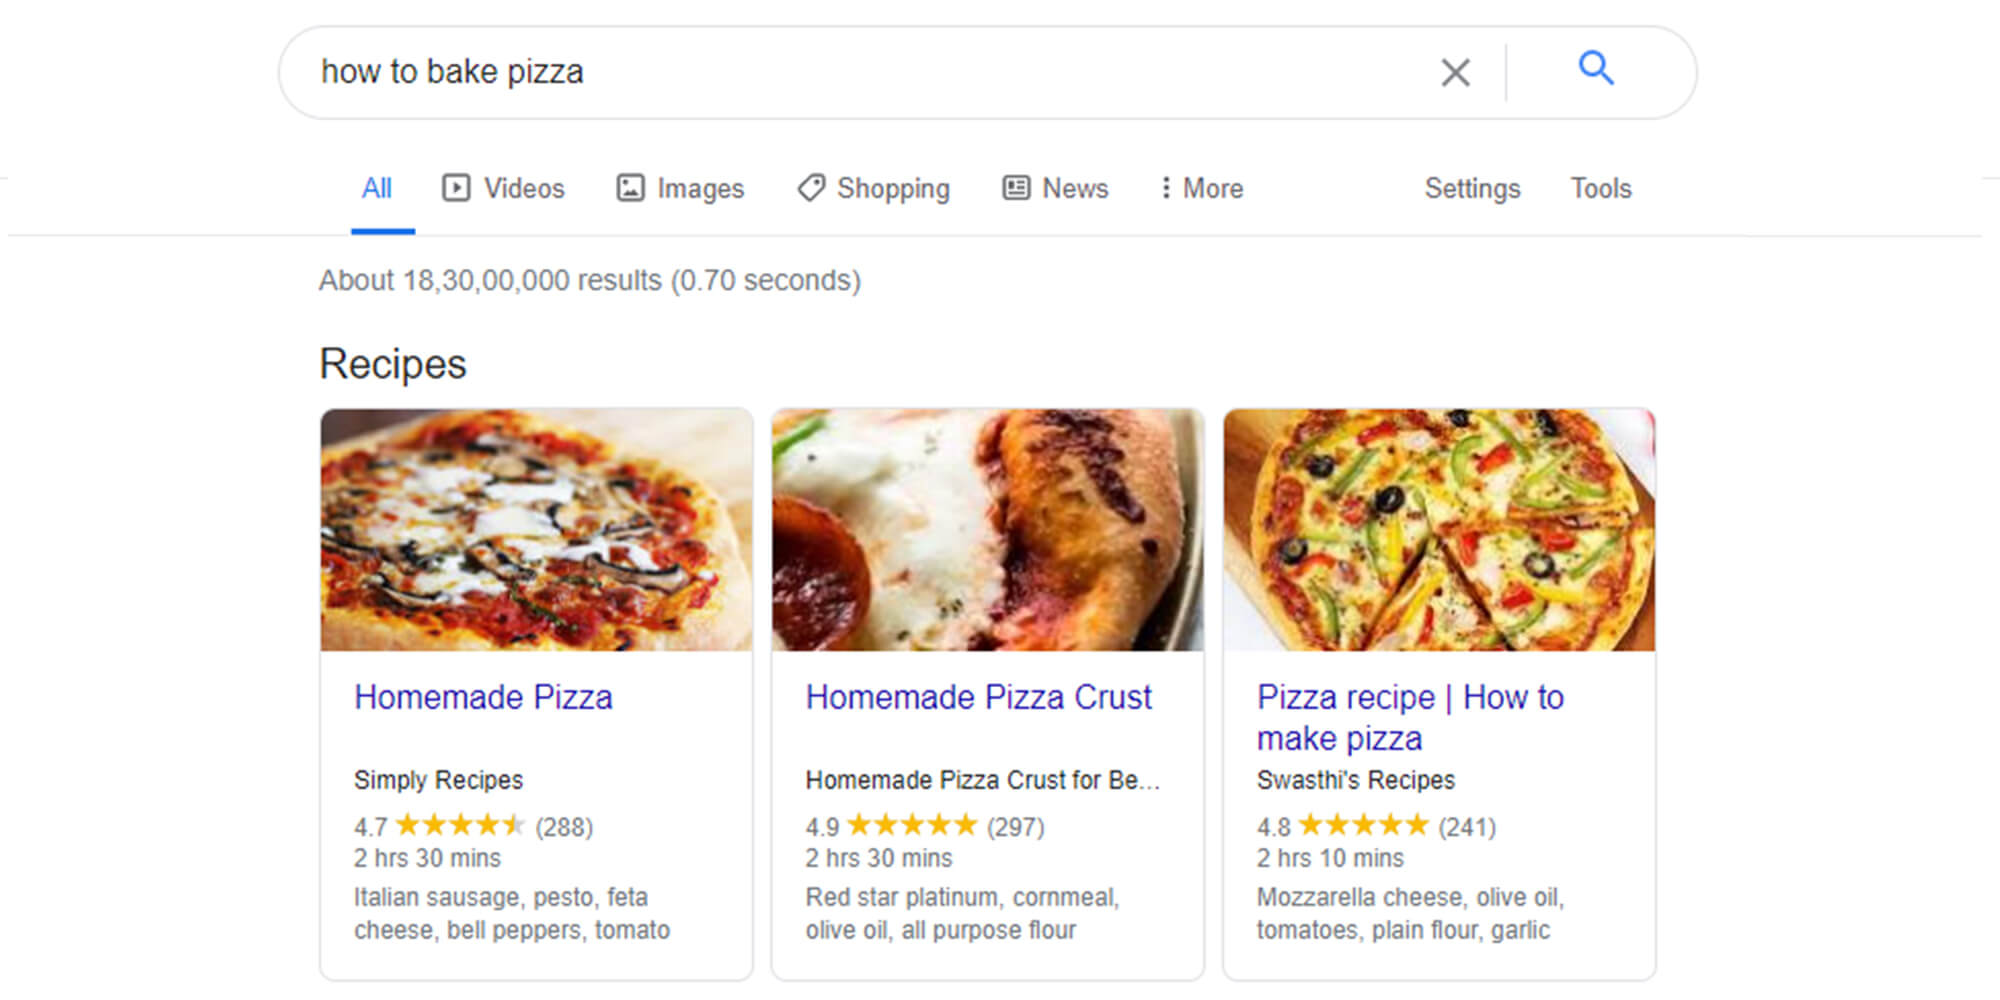 The User’s Search Intent how to bake pizza